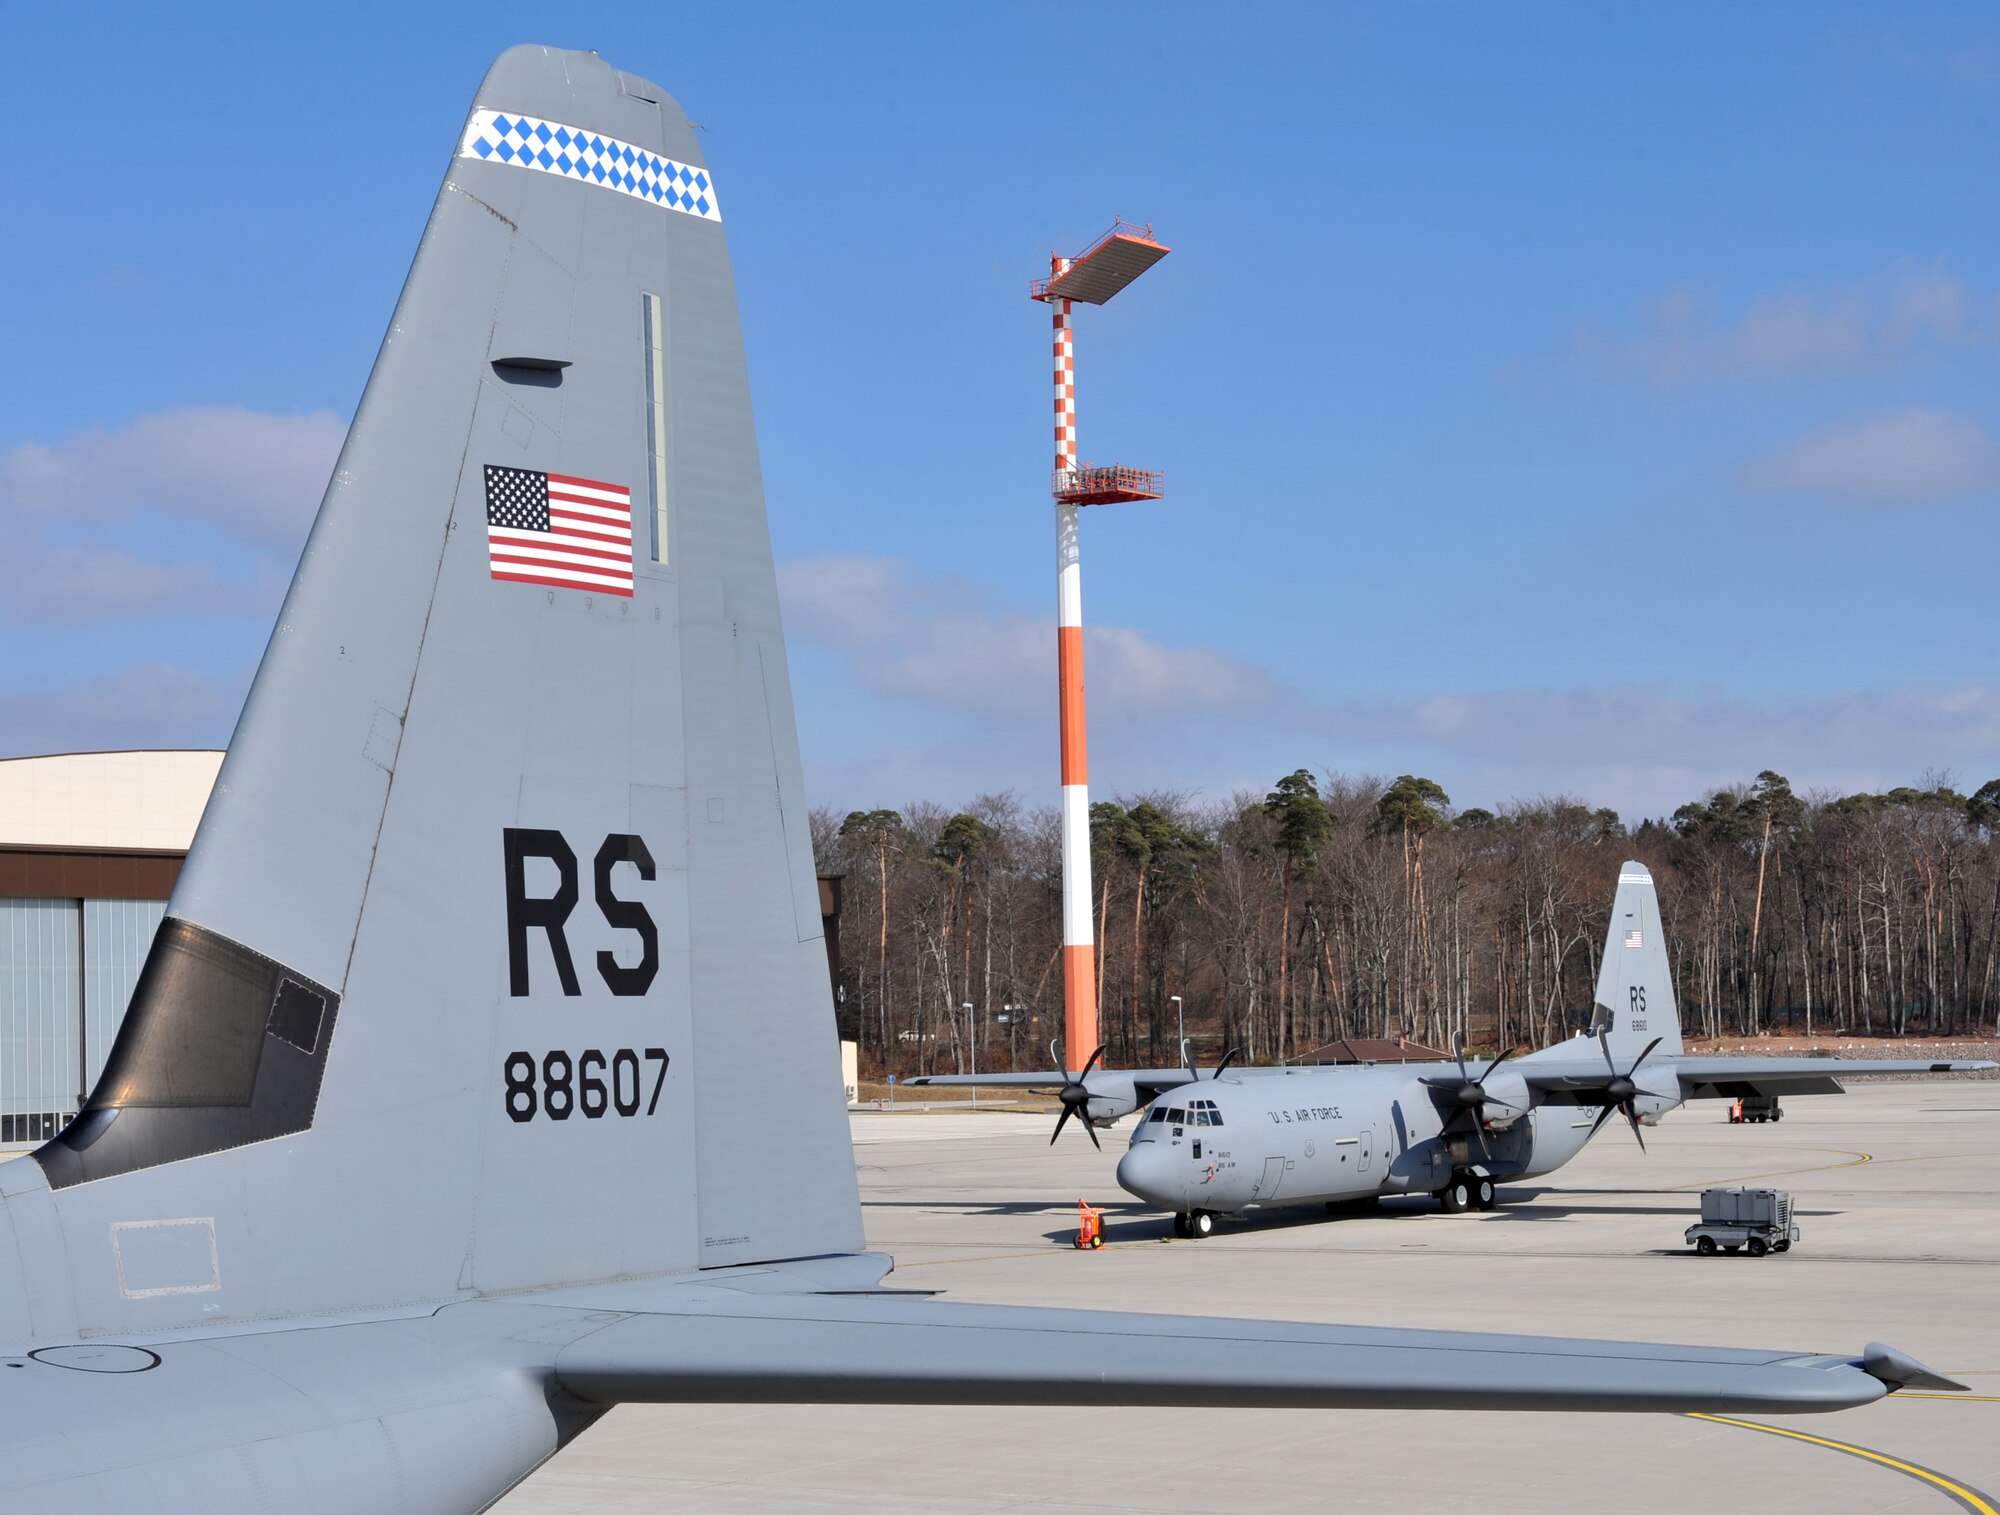 Two C-130J Super Hercules aircraft await pre-flight inspection and preventative maintenance, Ramstein Air Base, Germany, March 12, 2012. The C-130J provides efficient and reliable combat delivery, air-to-air refueling, special operations, disaster relief and humanitarian missions as part of revitalizing the Air Force fleet. (U.S. Air Force photo/Airman 1st Class Caitlin O'Neil-McKeown)